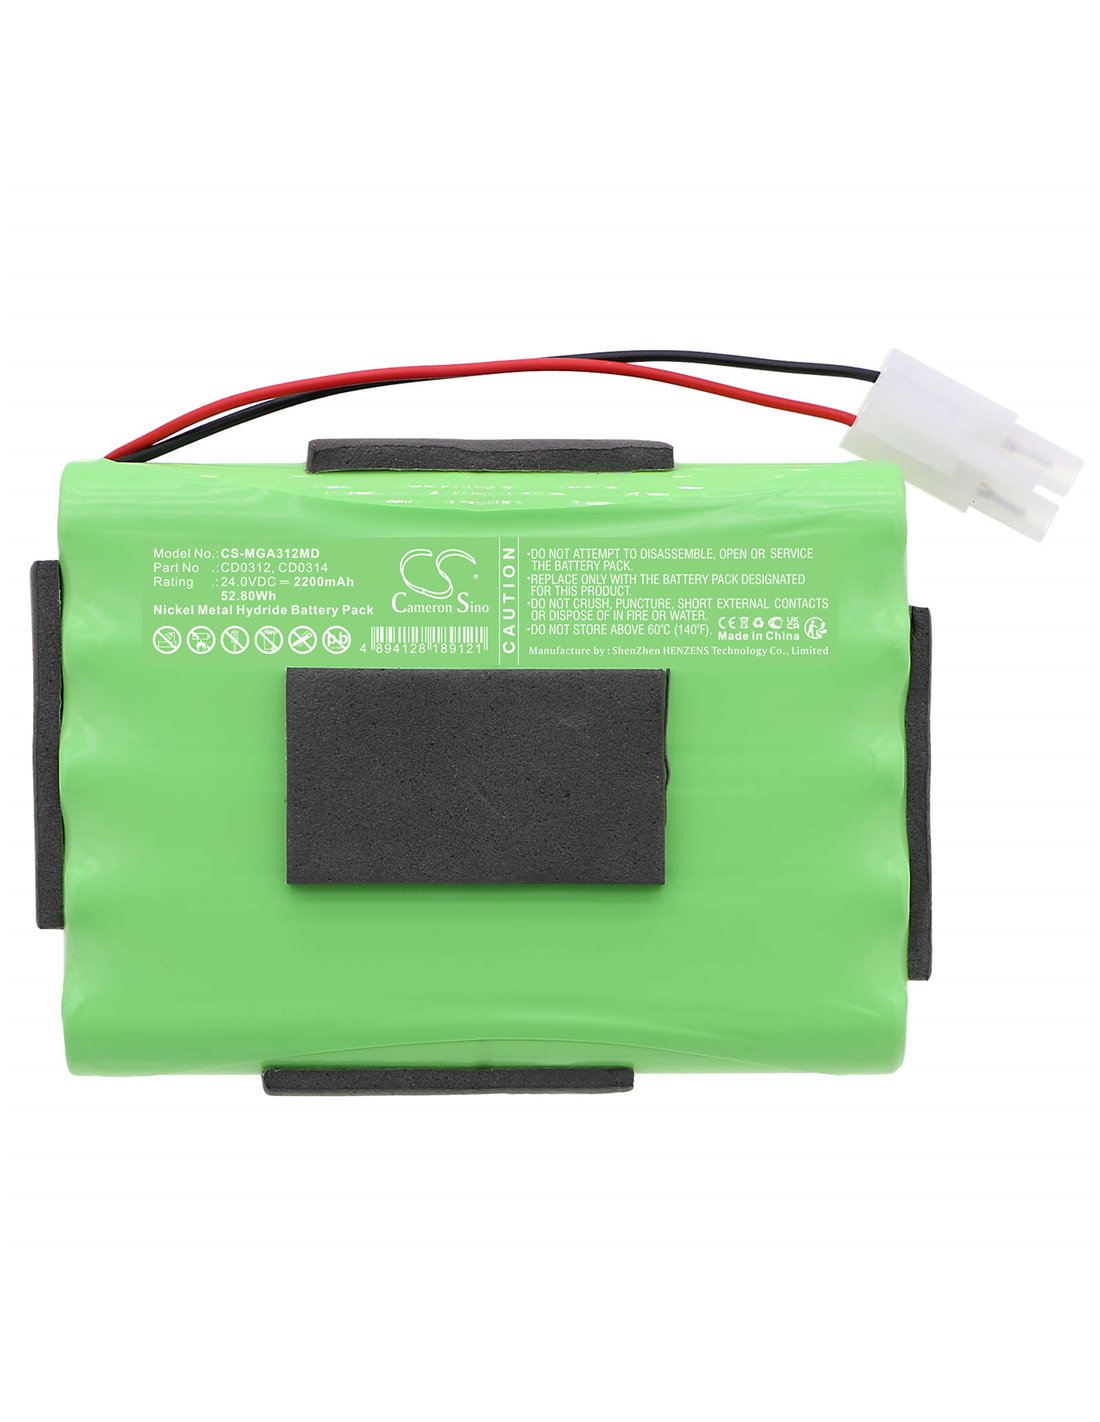 Mangar, Airflo 24 Low Pressure Air Com Replacement Battery shipped from  Canada